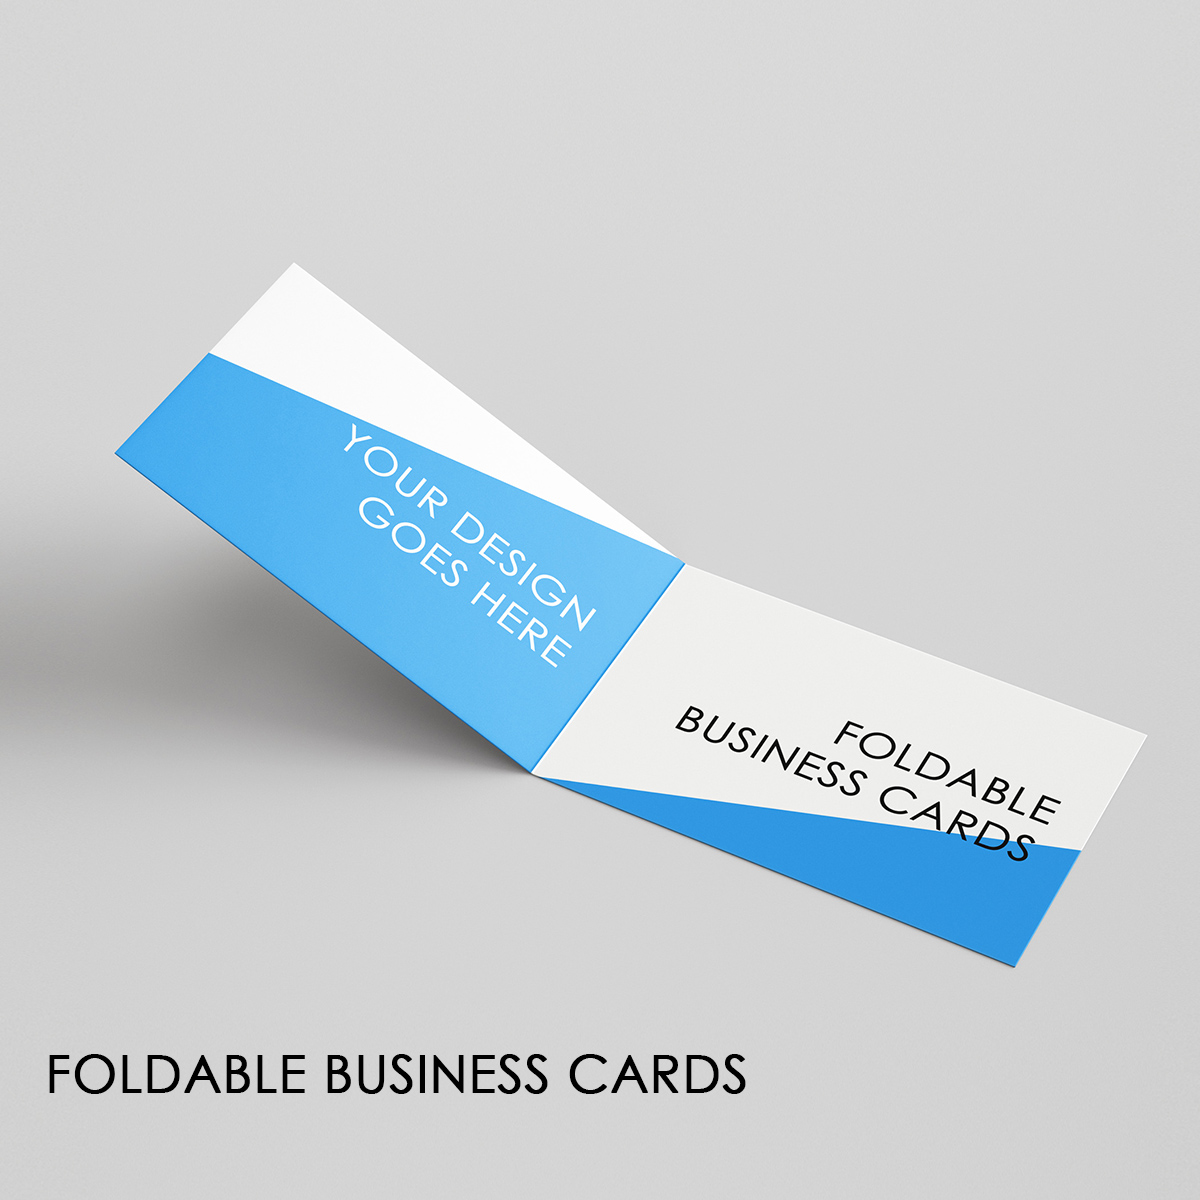 Folded Business cards printing